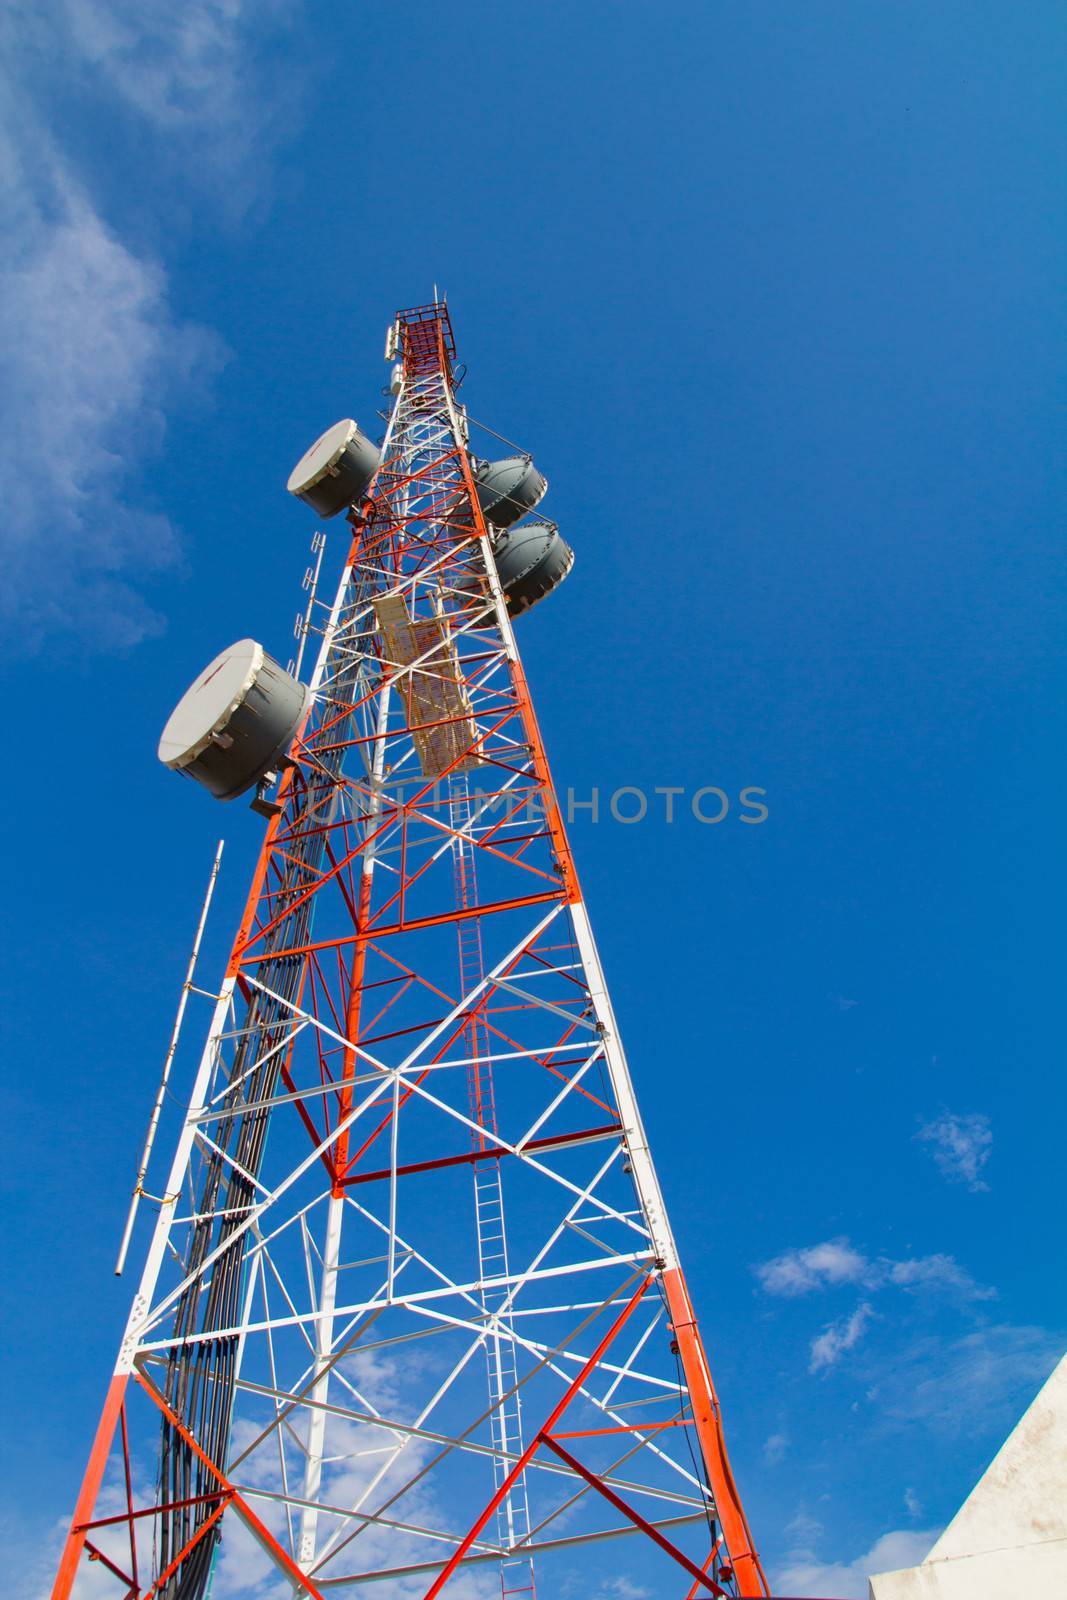 large communication tower with satelite dishes